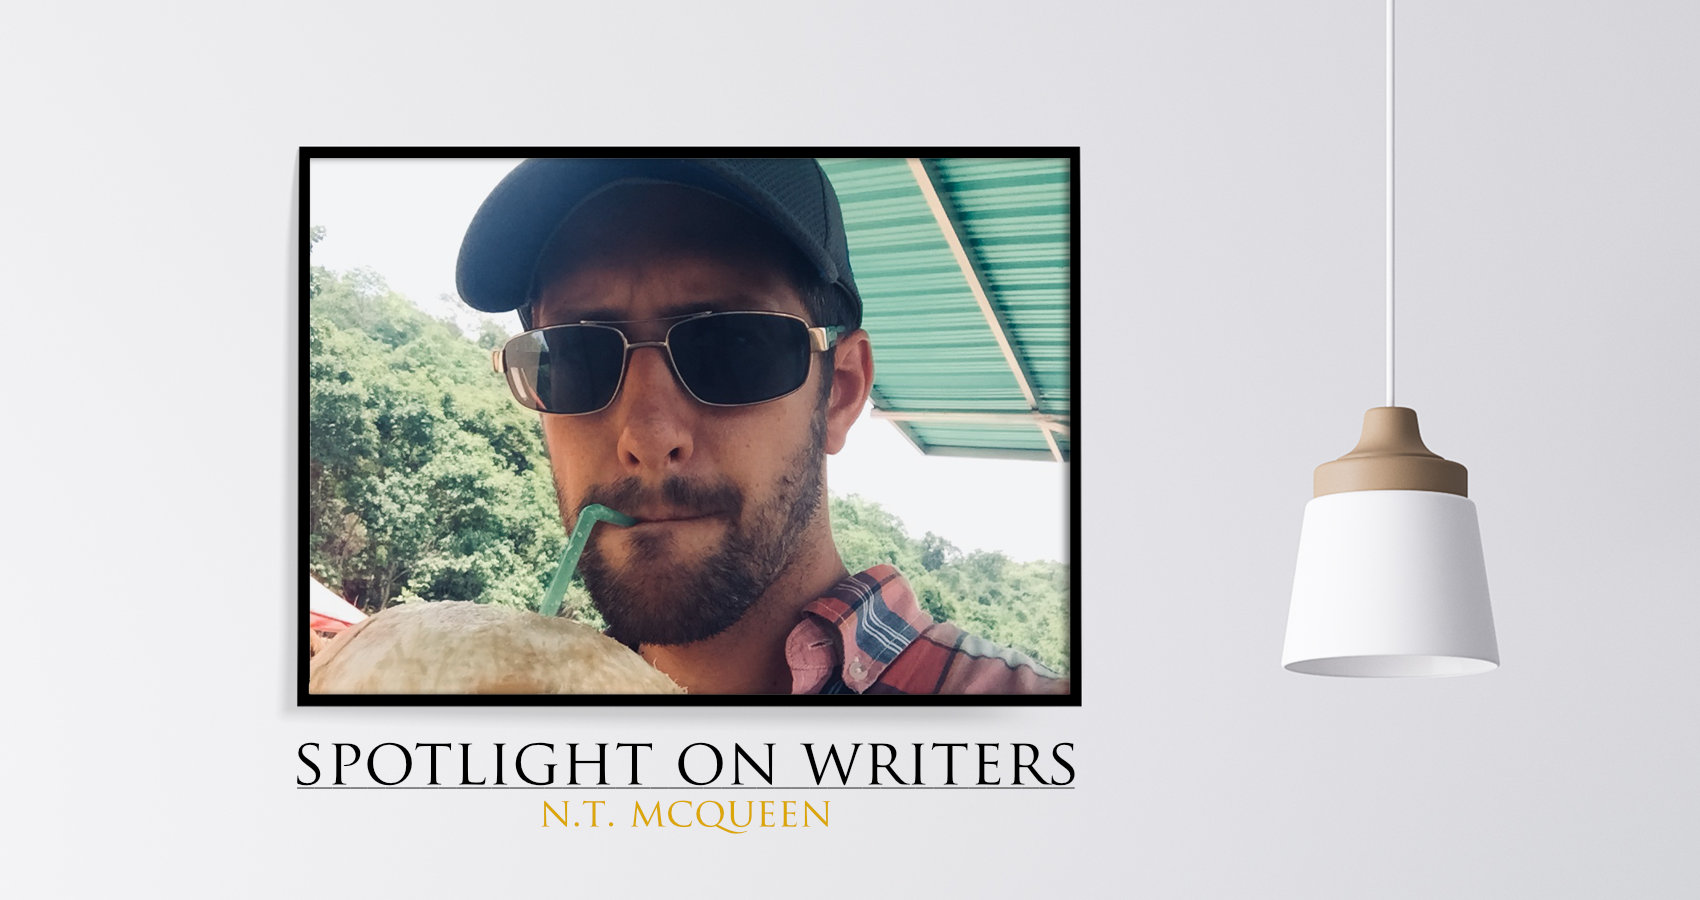 Spotlight On Writers - N.T. McQueen, interview at Spillwords.com